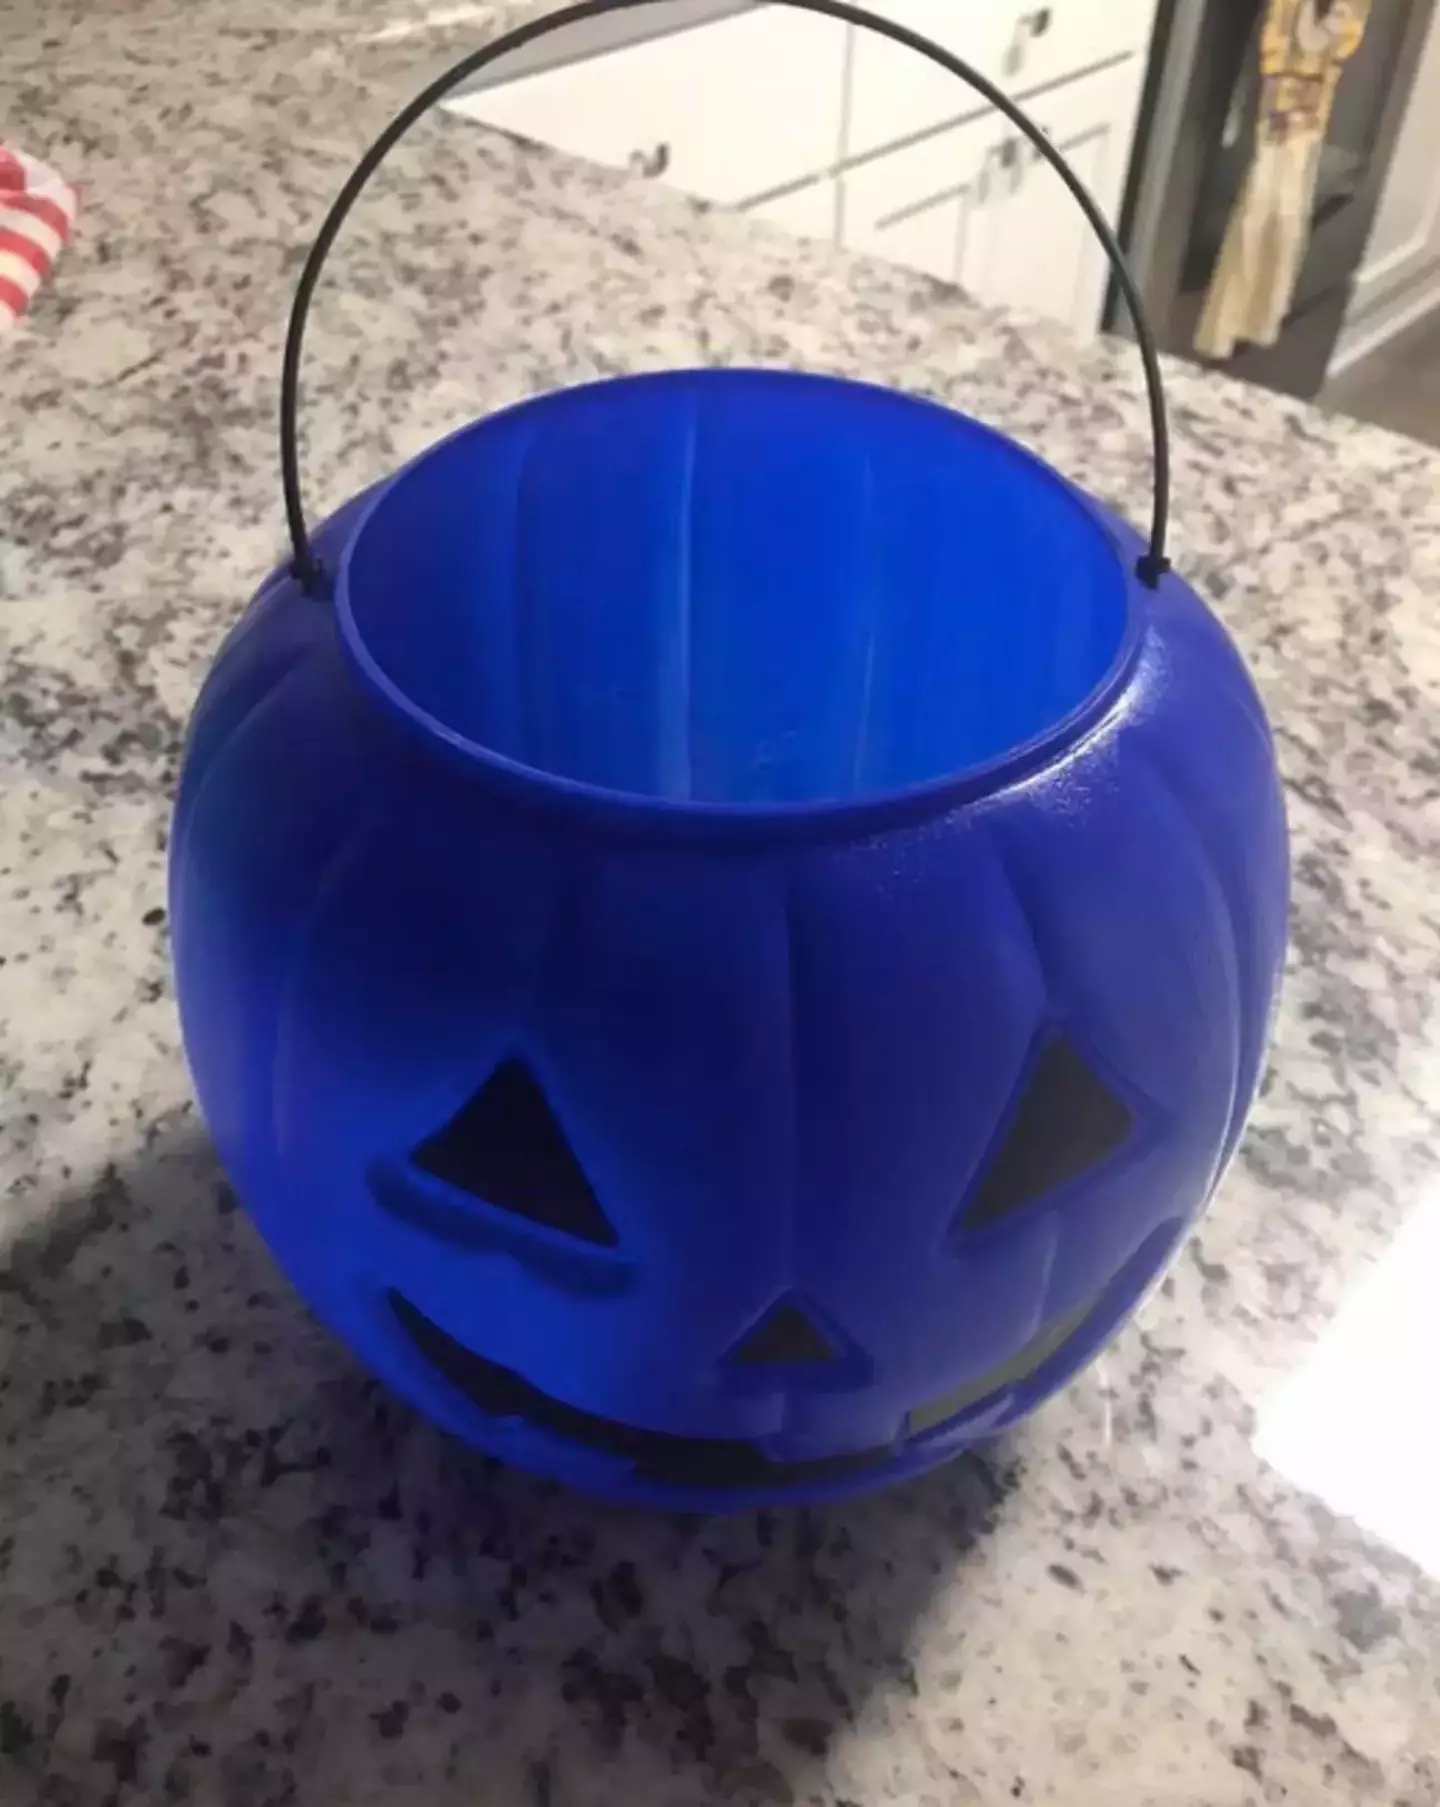 The blue bucket could be an indication the person has autism.